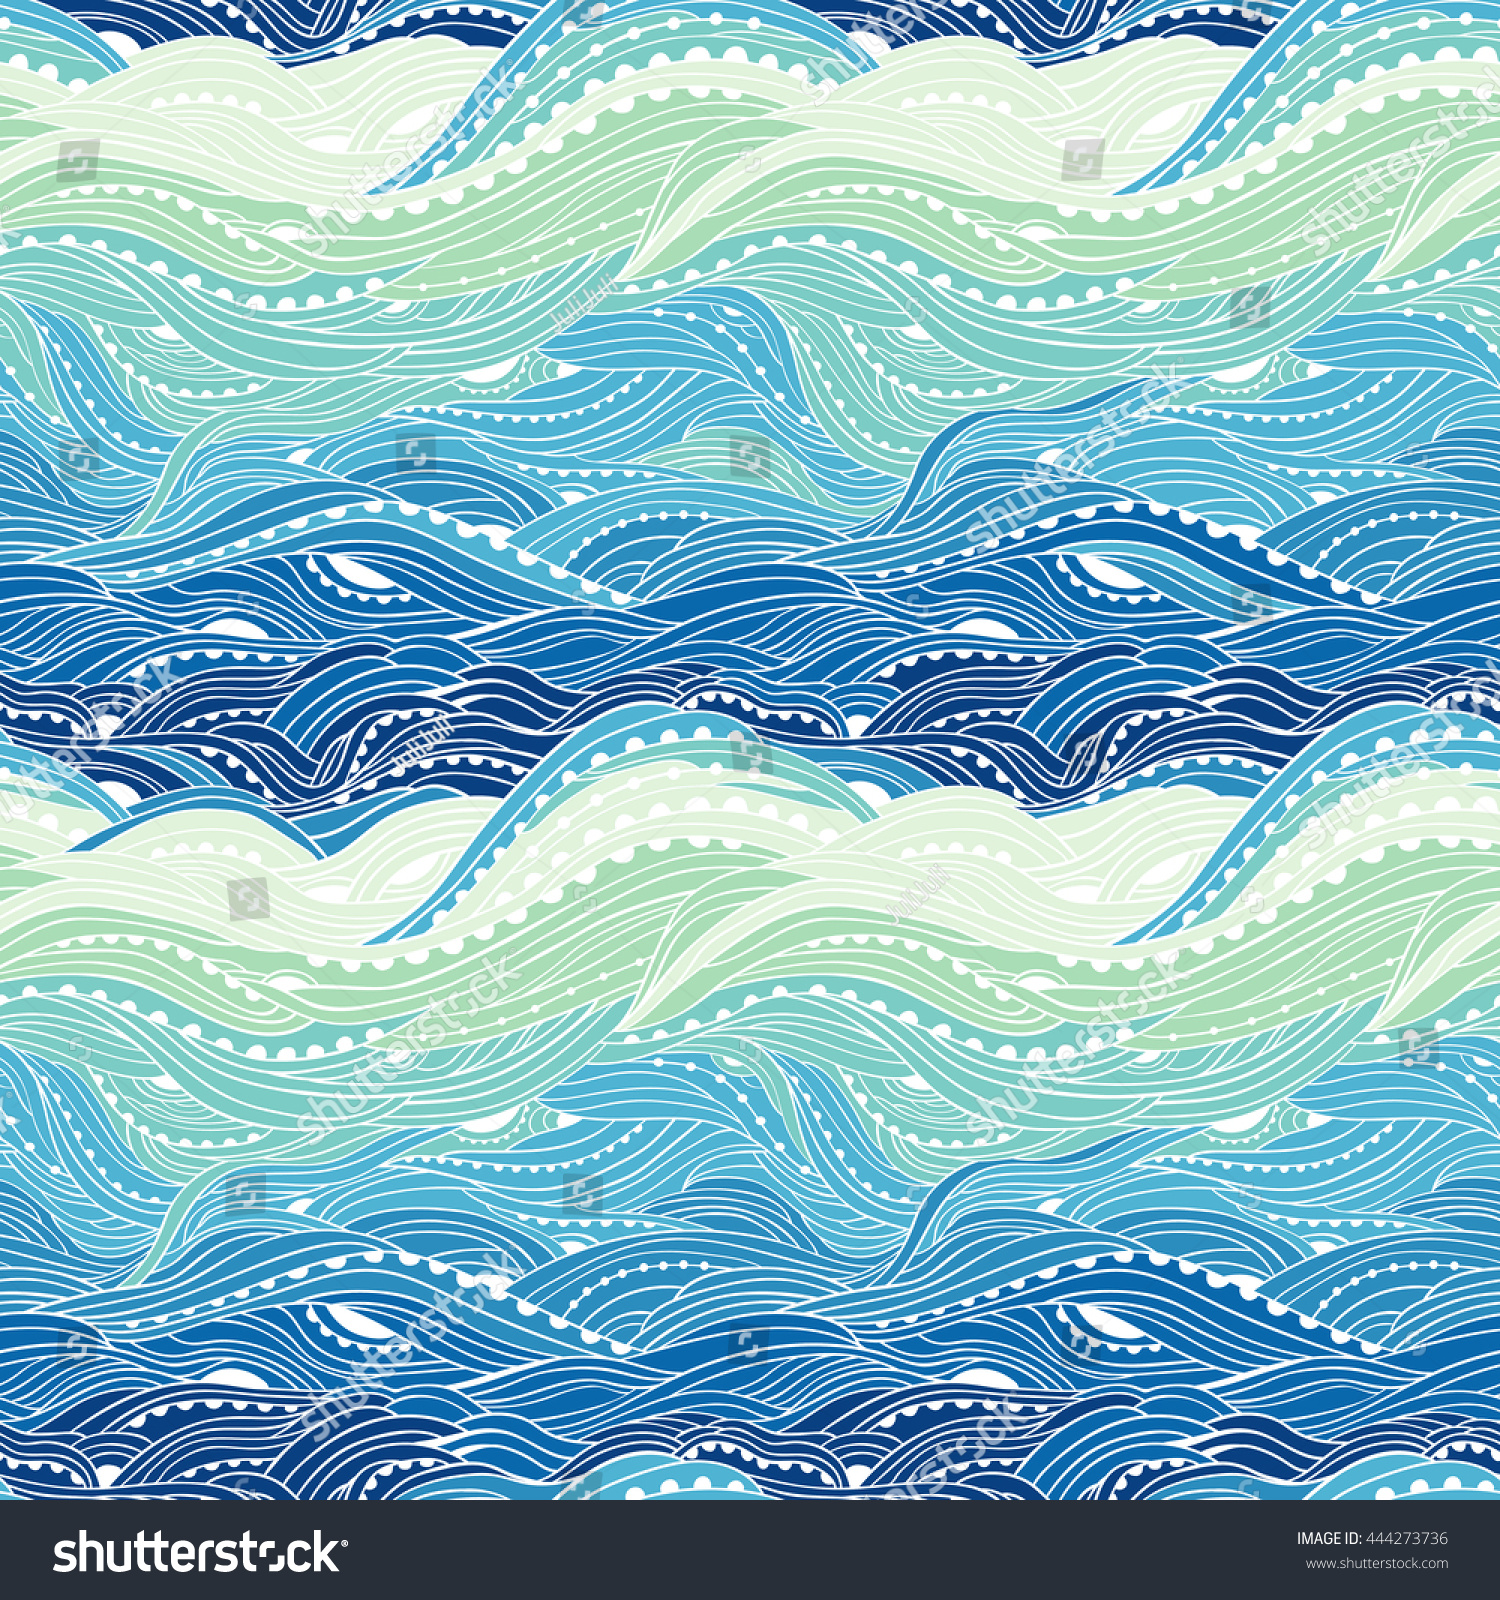 Abstract Seamless Water Pattern Handdrawn Waves Stock ...
 Ocean Water Pattern